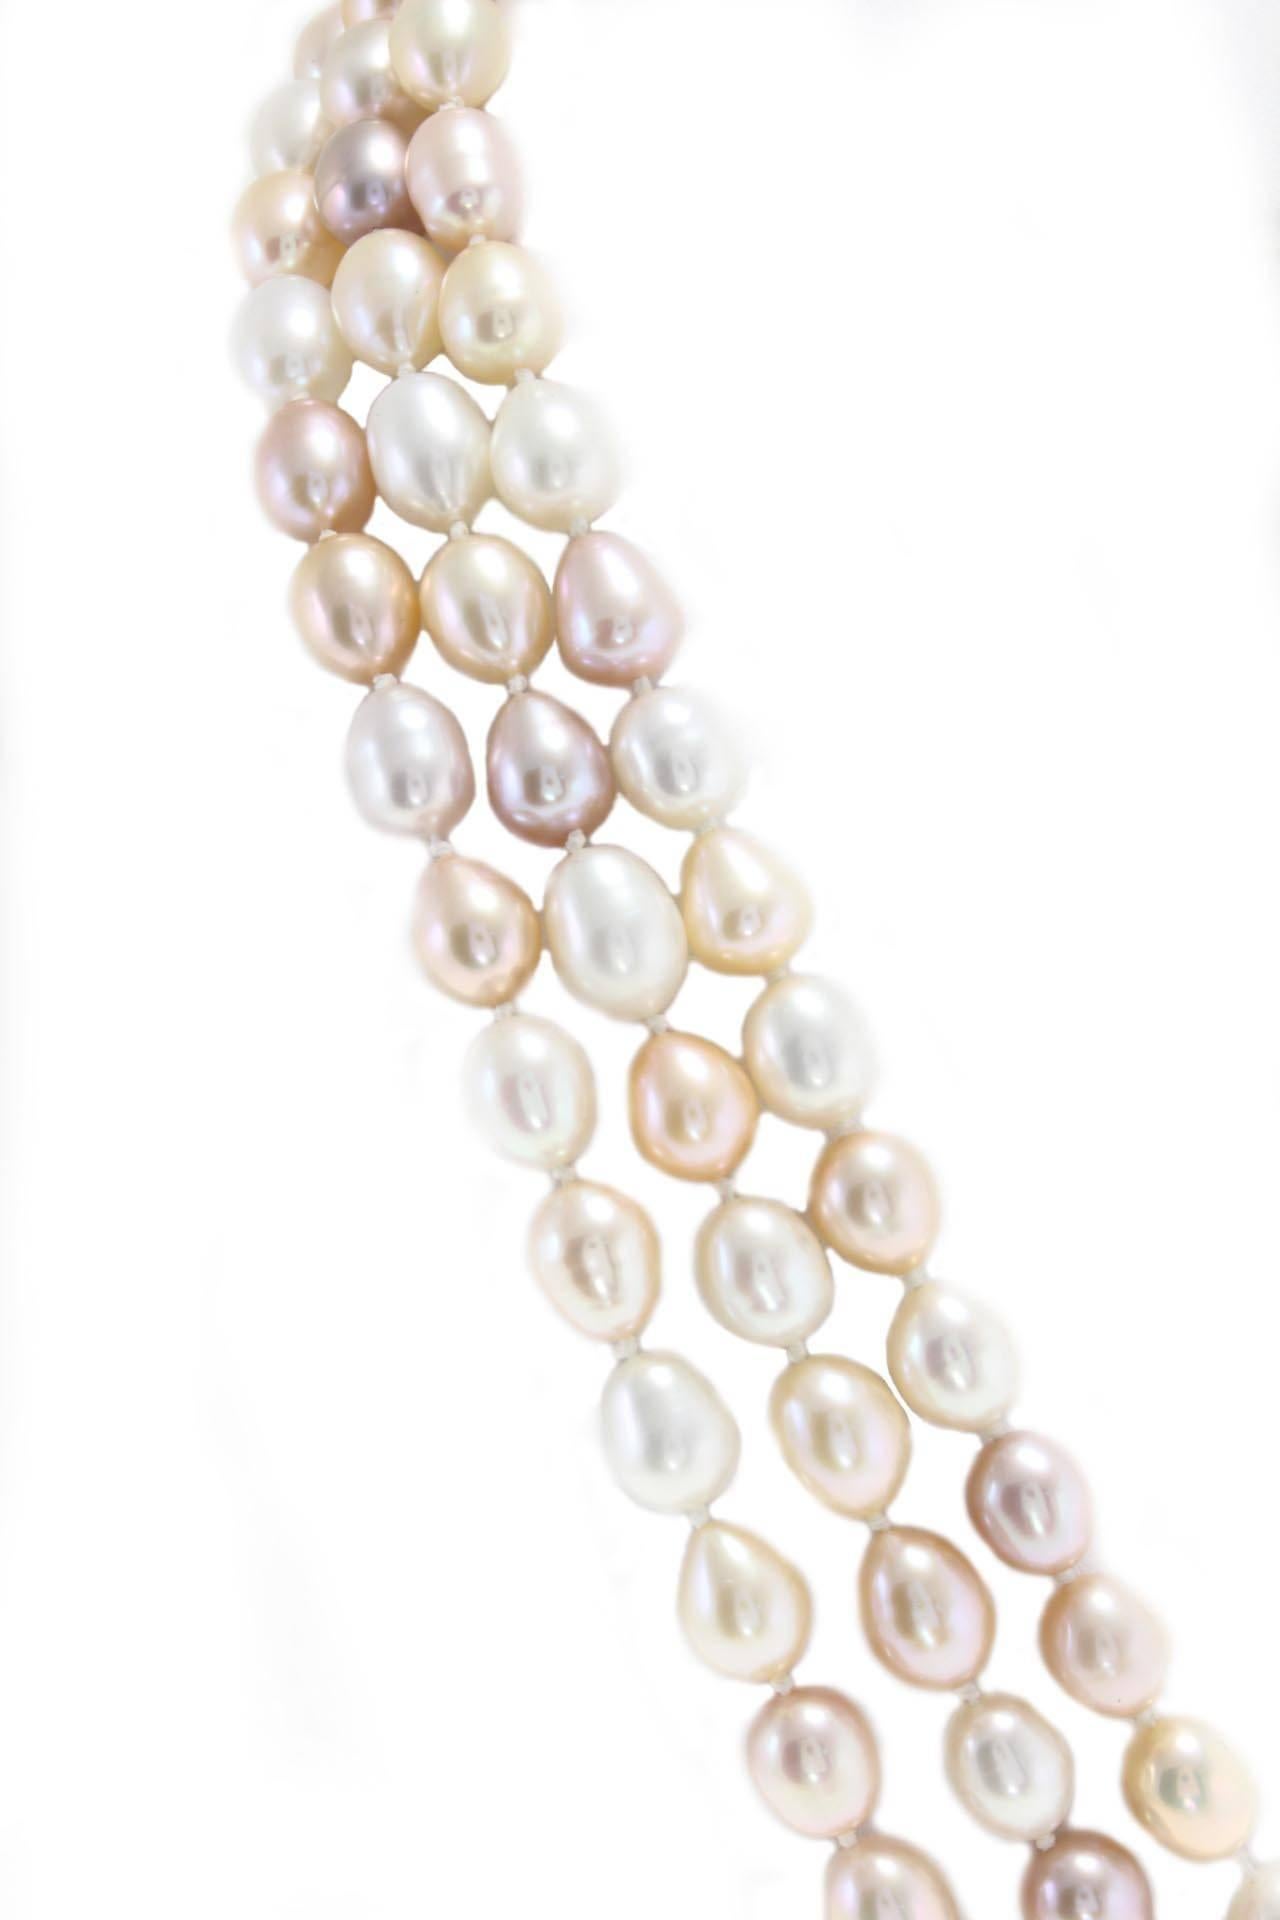 how much do pearl necklaces cost